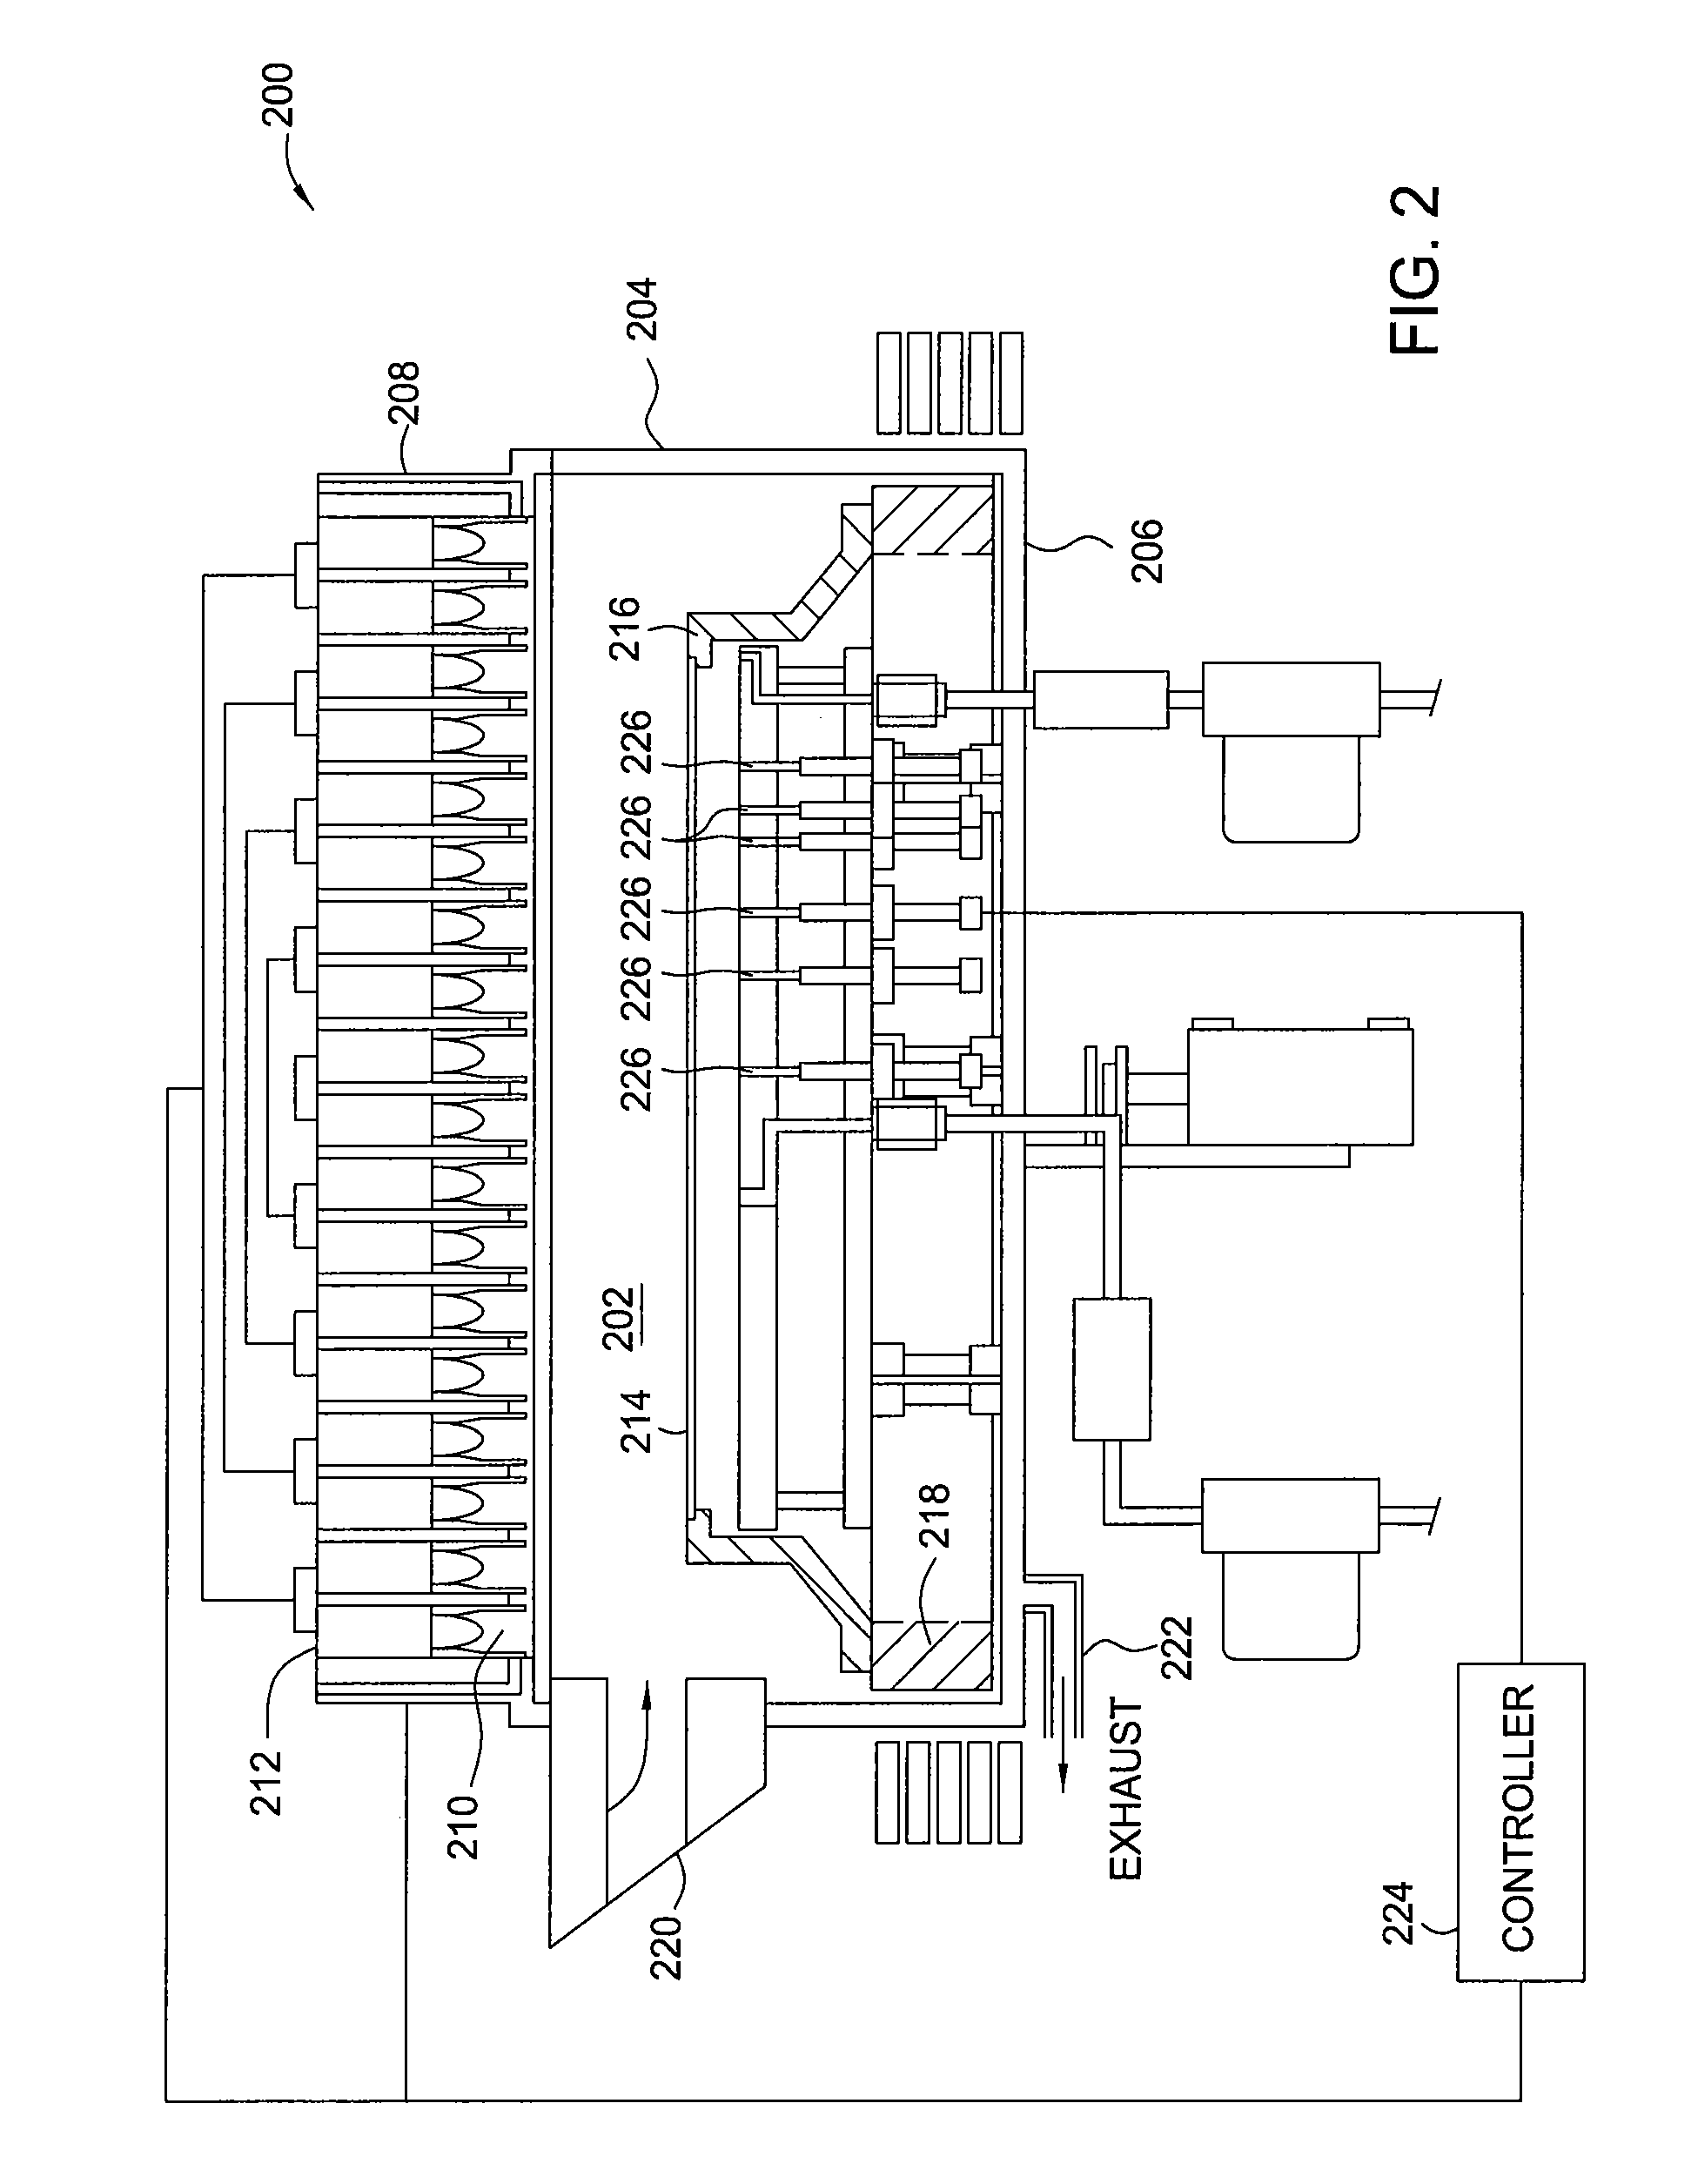 Method of improving oxide growth rate of selective oxidation processes